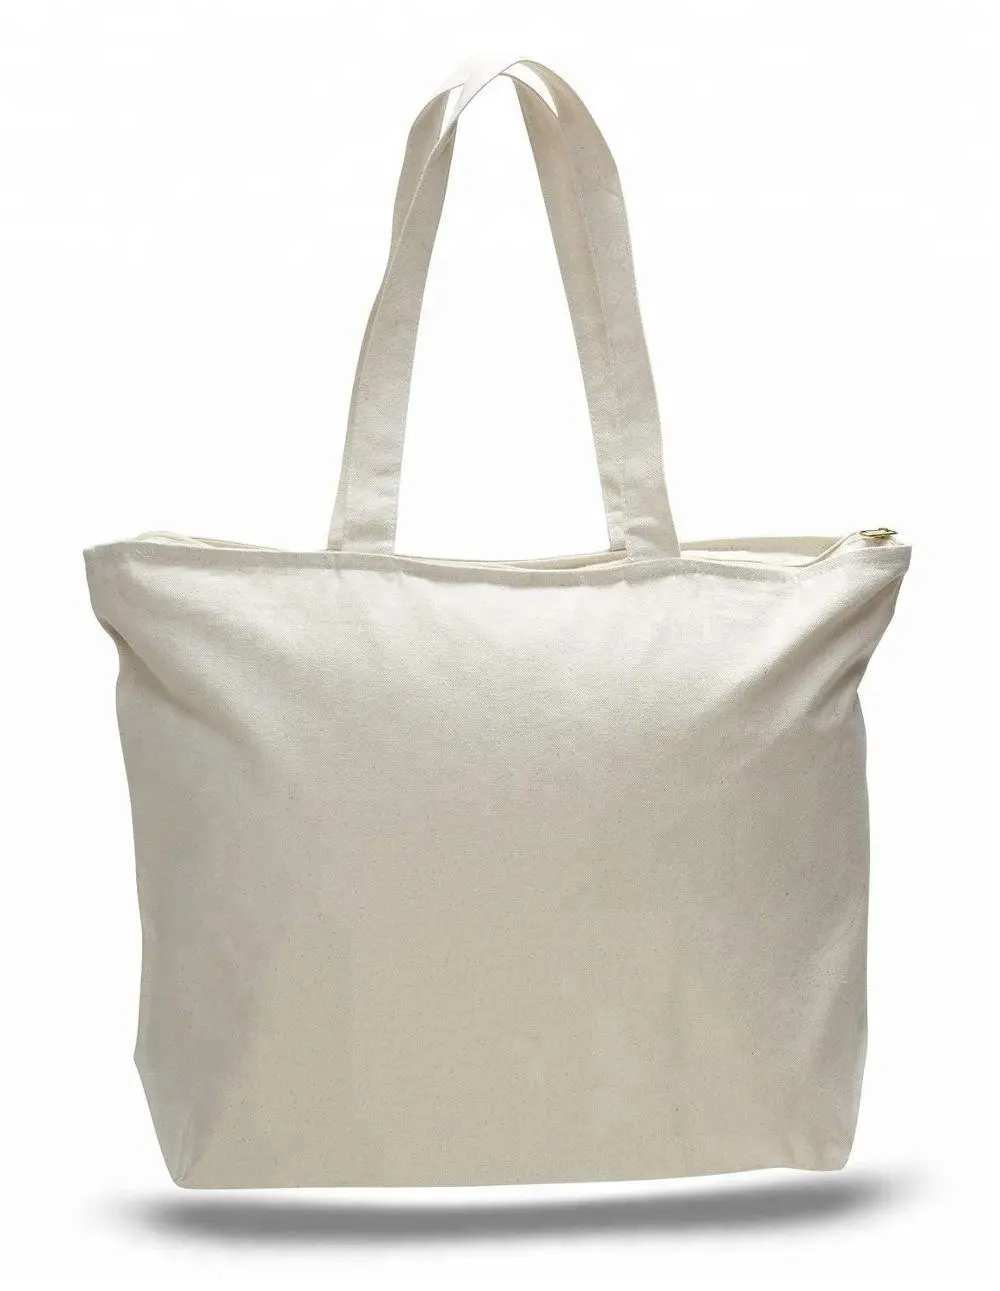 Heavy High Quality Canvas bag Large Tote cotton Bags with Zippered Closure